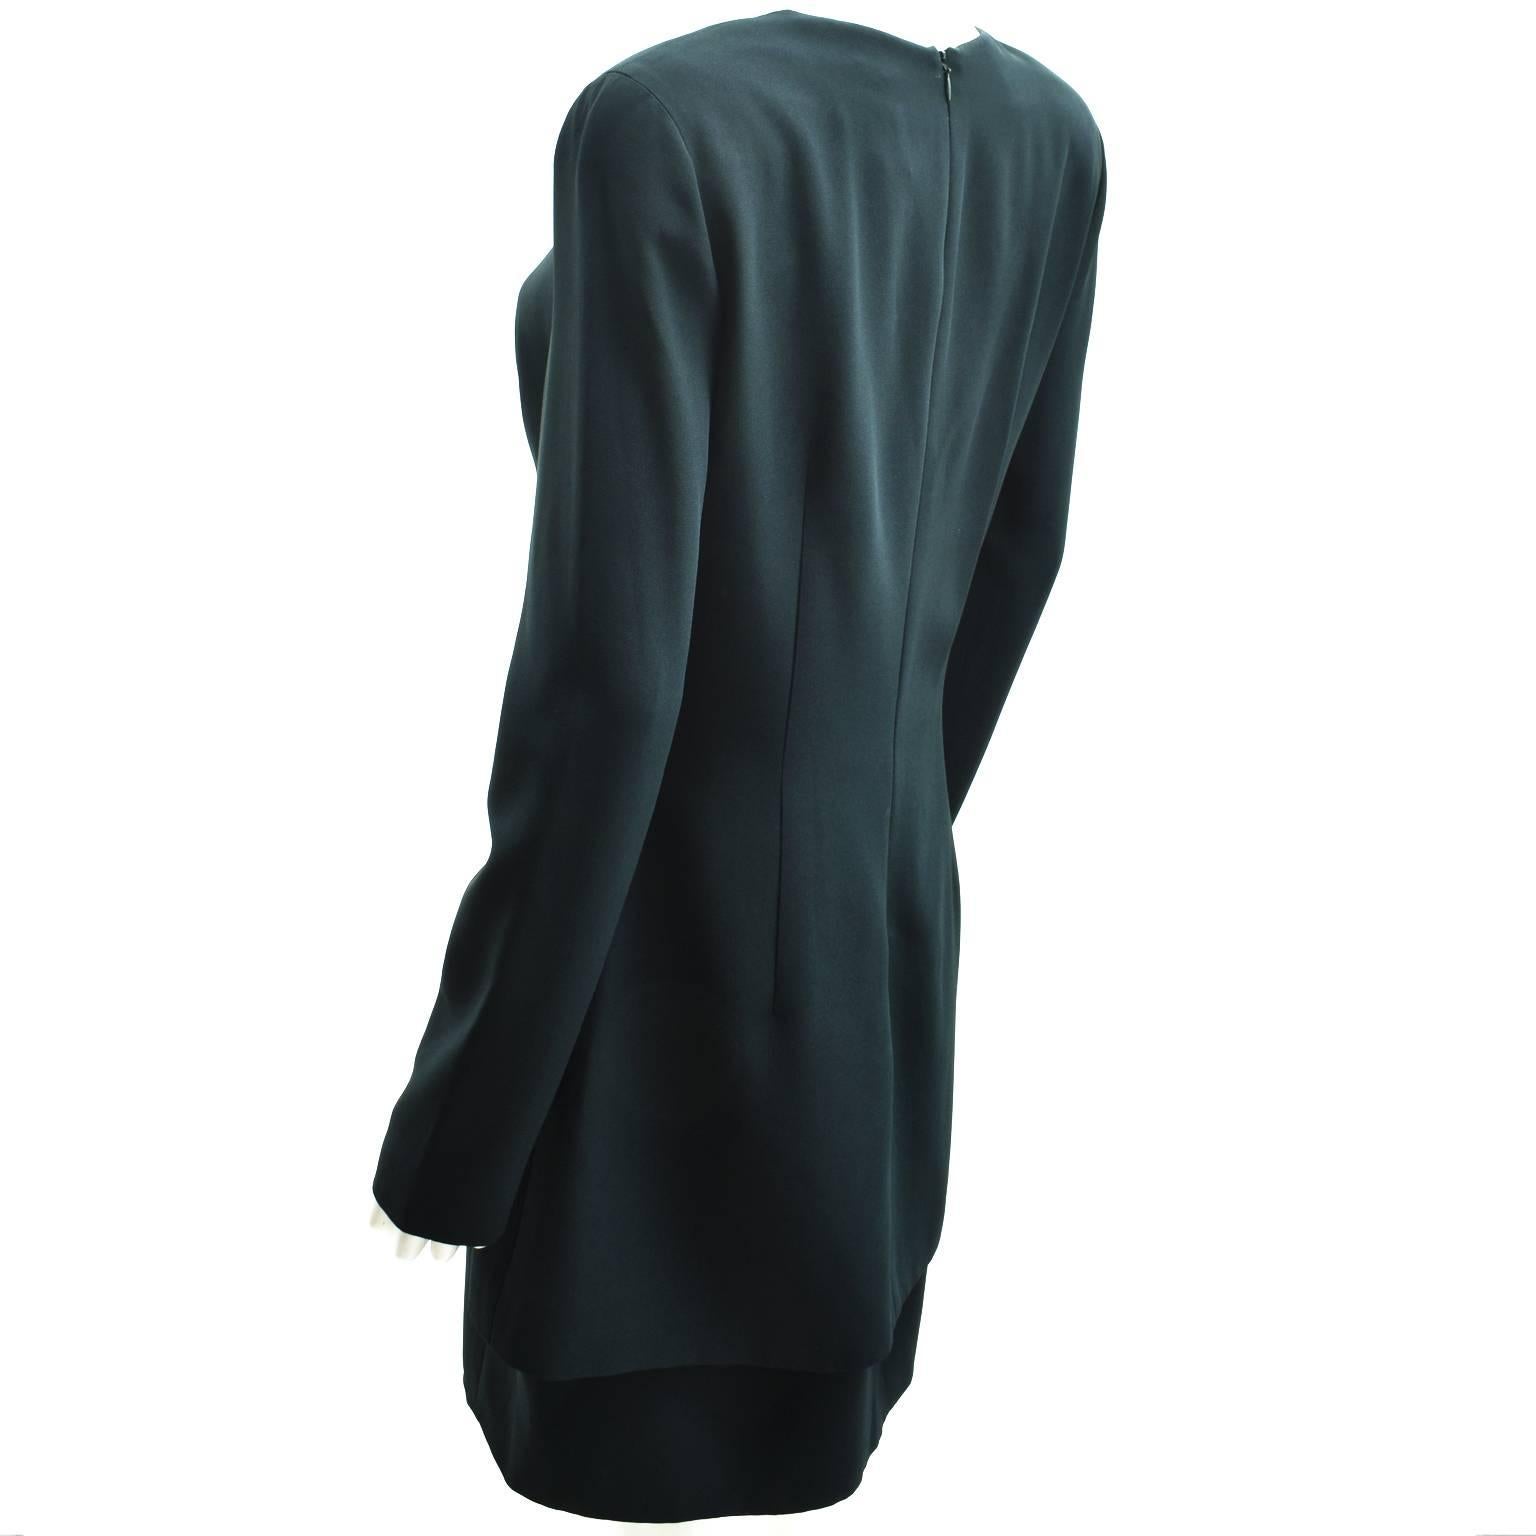 Alexander McQueen Teal Long Sleeve Structured Dress In Excellent Condition For Sale In London, GB